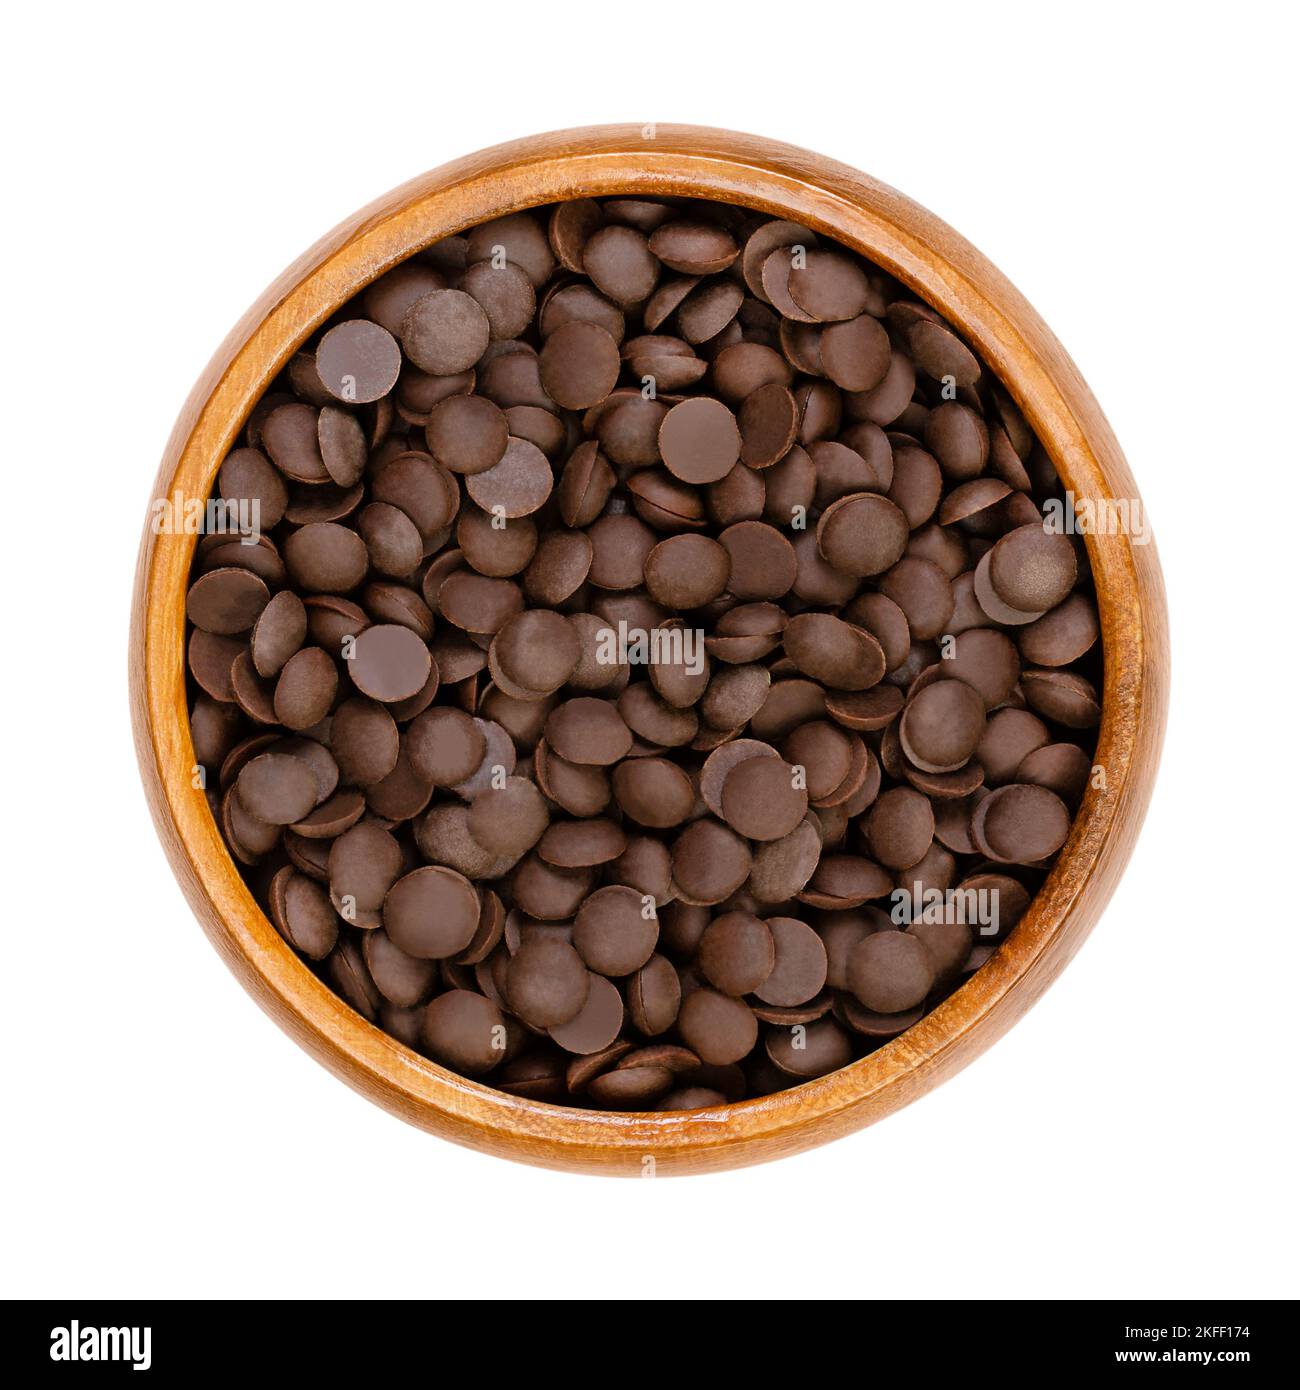 Bittersweet chocolate drops, couverture in a wooden bowl. Chocolate coating mass in drop form. A topping and flavoring for cookies and desserts. Stock Photo